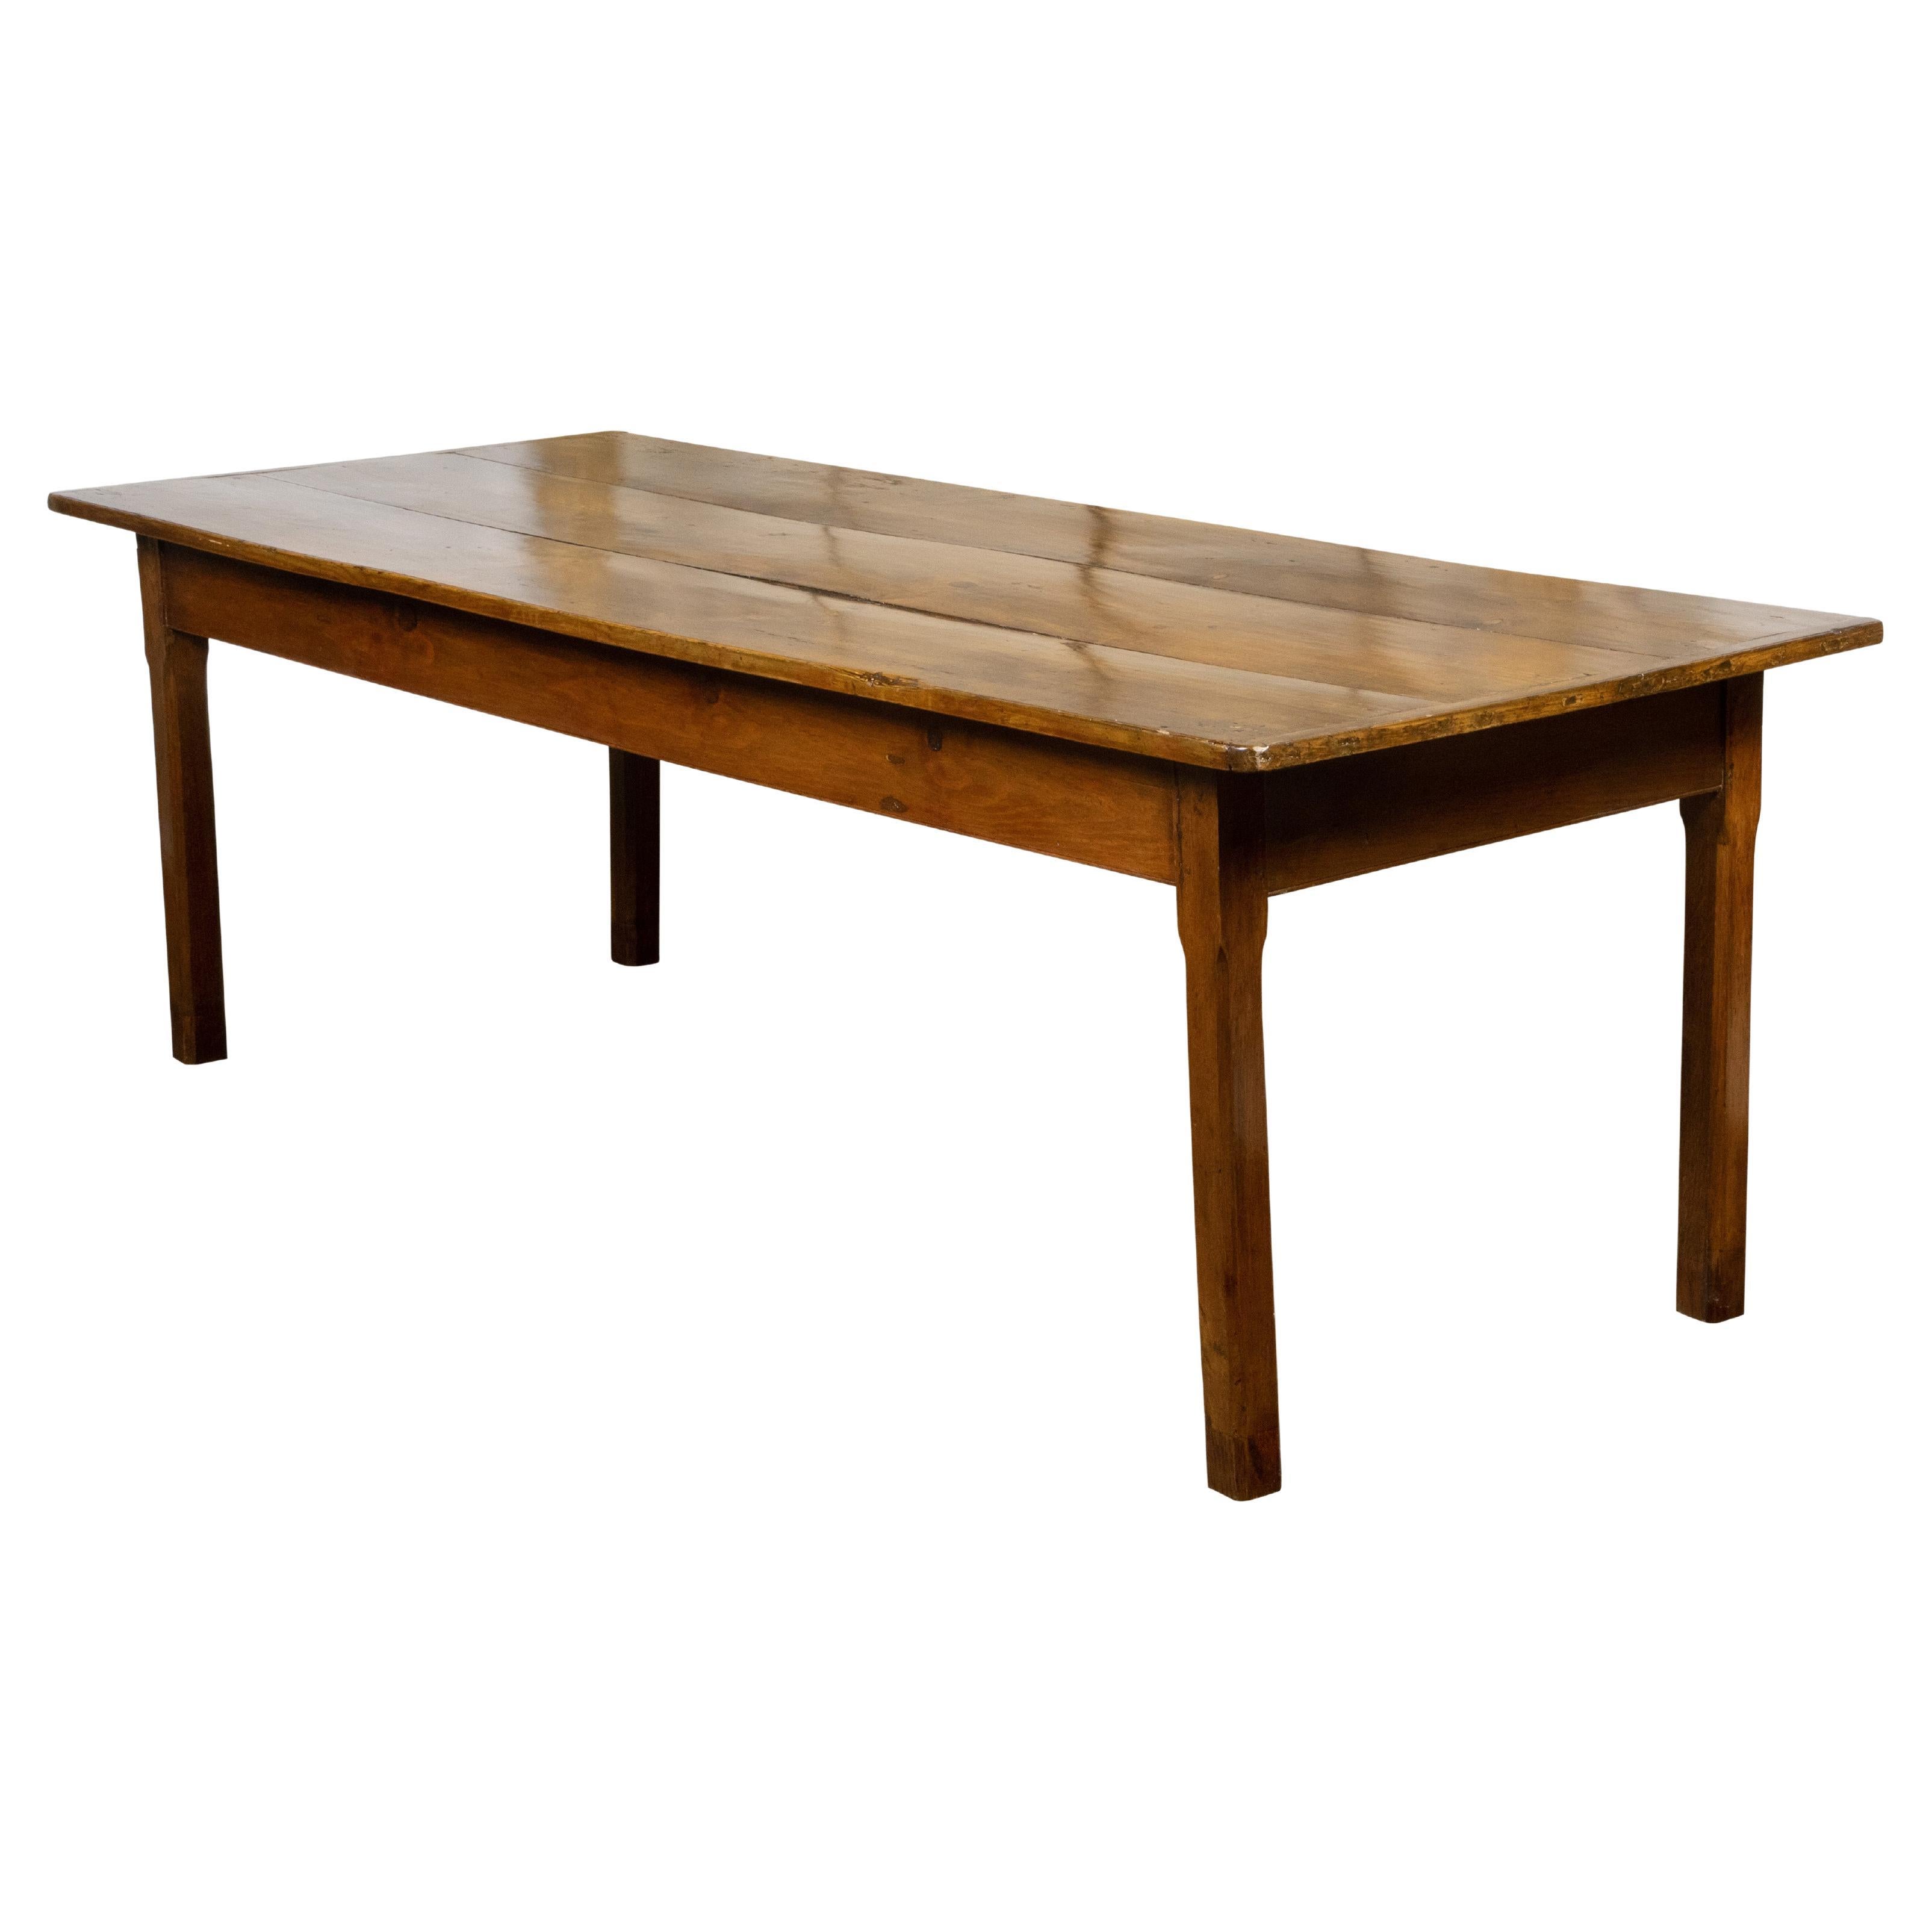 Country French Rustic Pine Farm Table with Straight Legs from the 19th Century For Sale